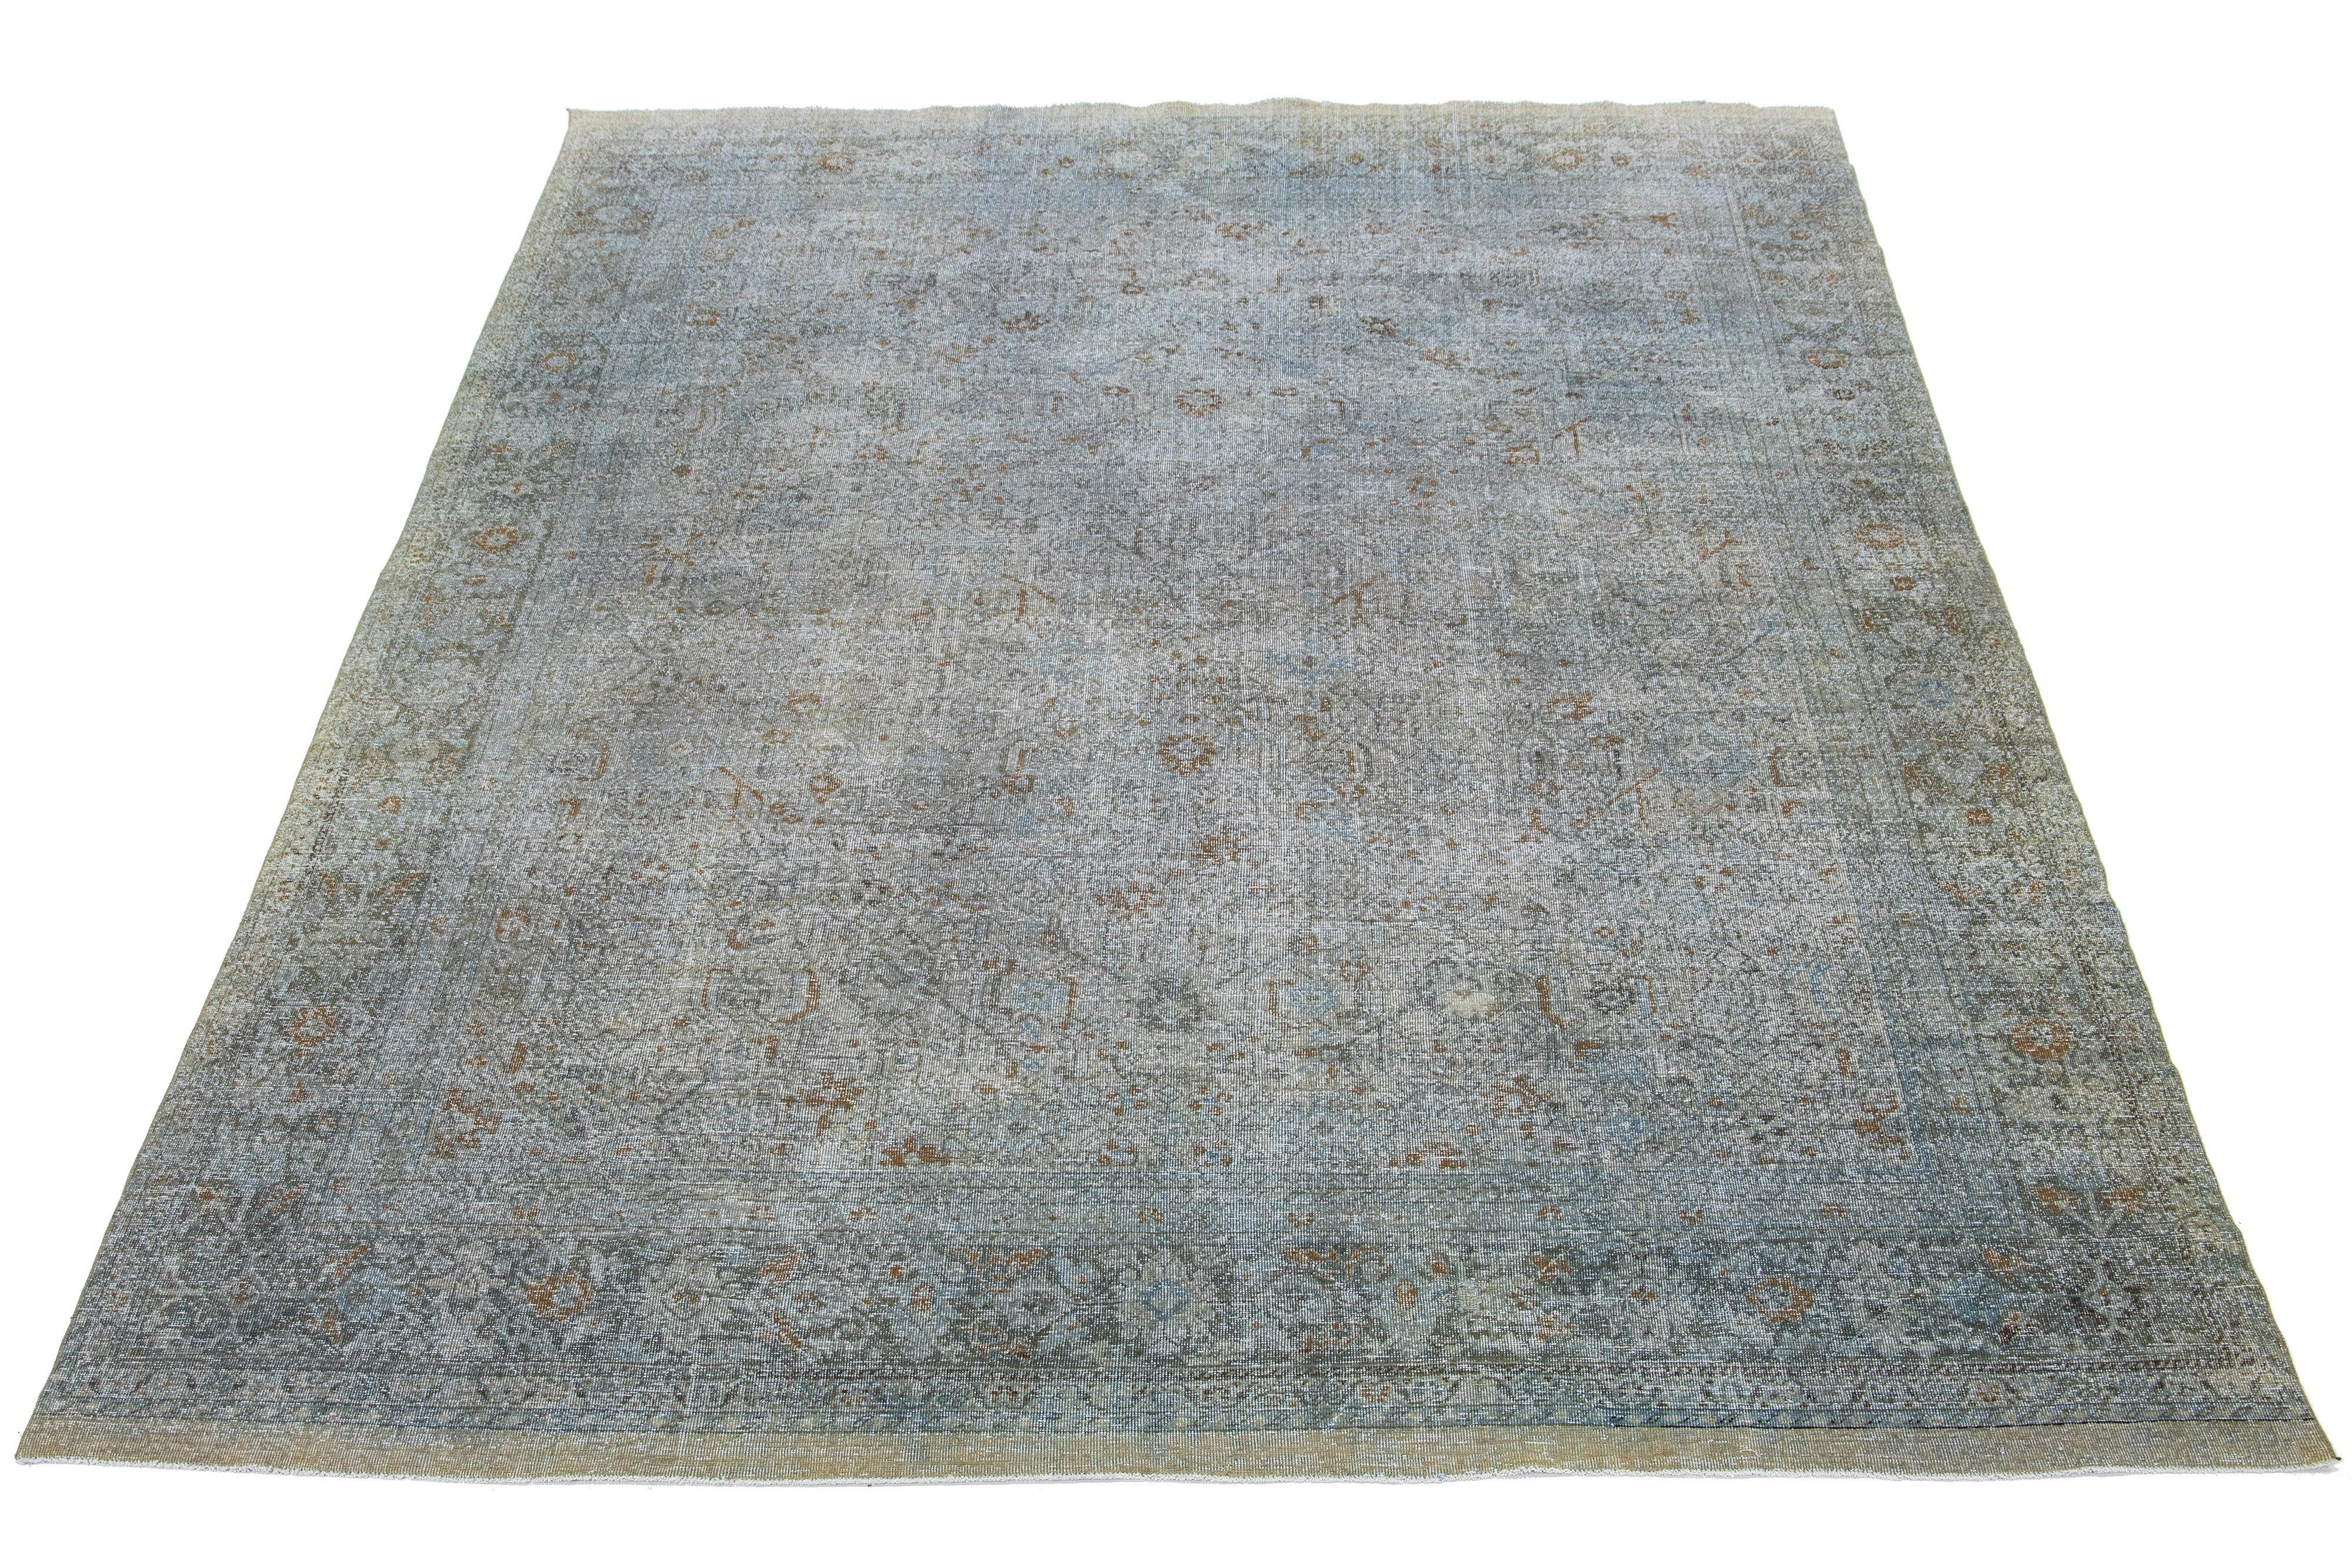 The handcrafted Persian Tabriz wool rug features a beautiful traditional floral pattern. The alluring contrast between the gray background and the distressed beige, rust, and brown floral design further enhances its beauty.

This rug measures 9'7